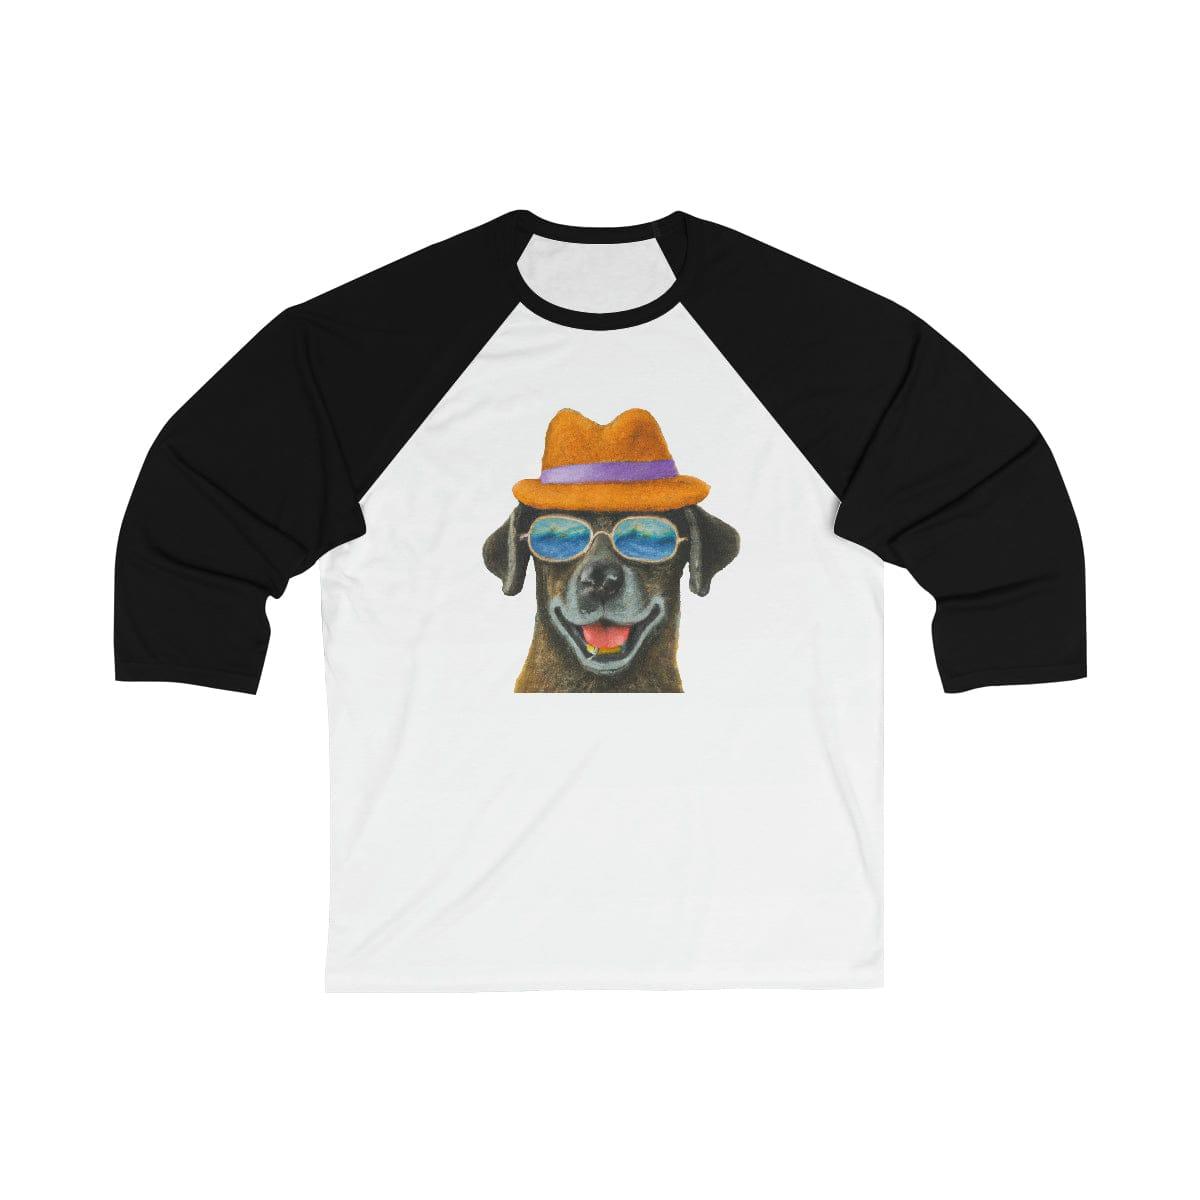 Dog at the beach wearing a hat and sunglasses arts unisex 3\4 Sleeve Baseball Tee for women - Giftsmojo